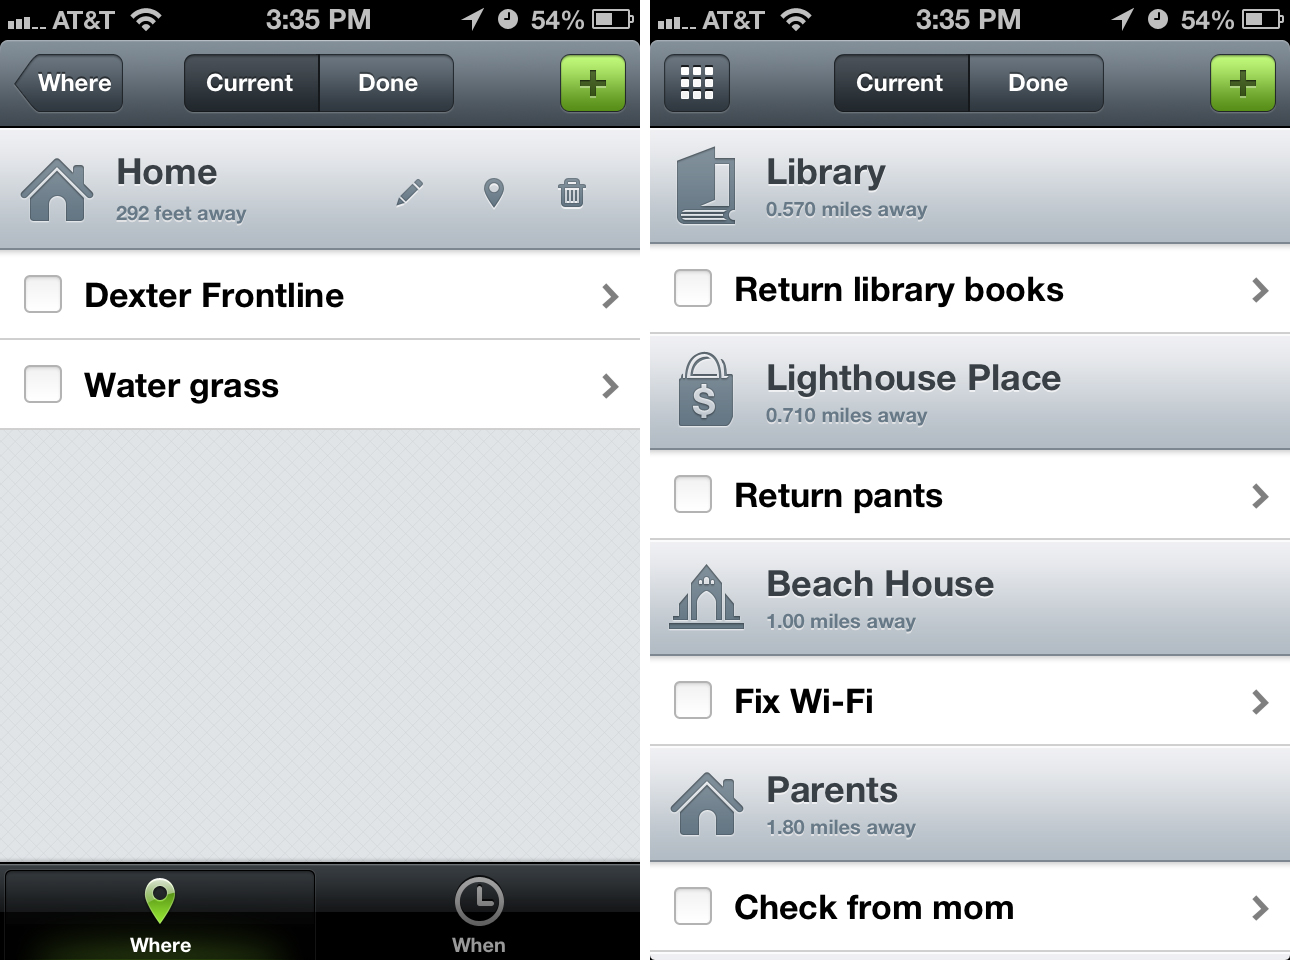 Checkmark for iPhone recurring reminders and customization